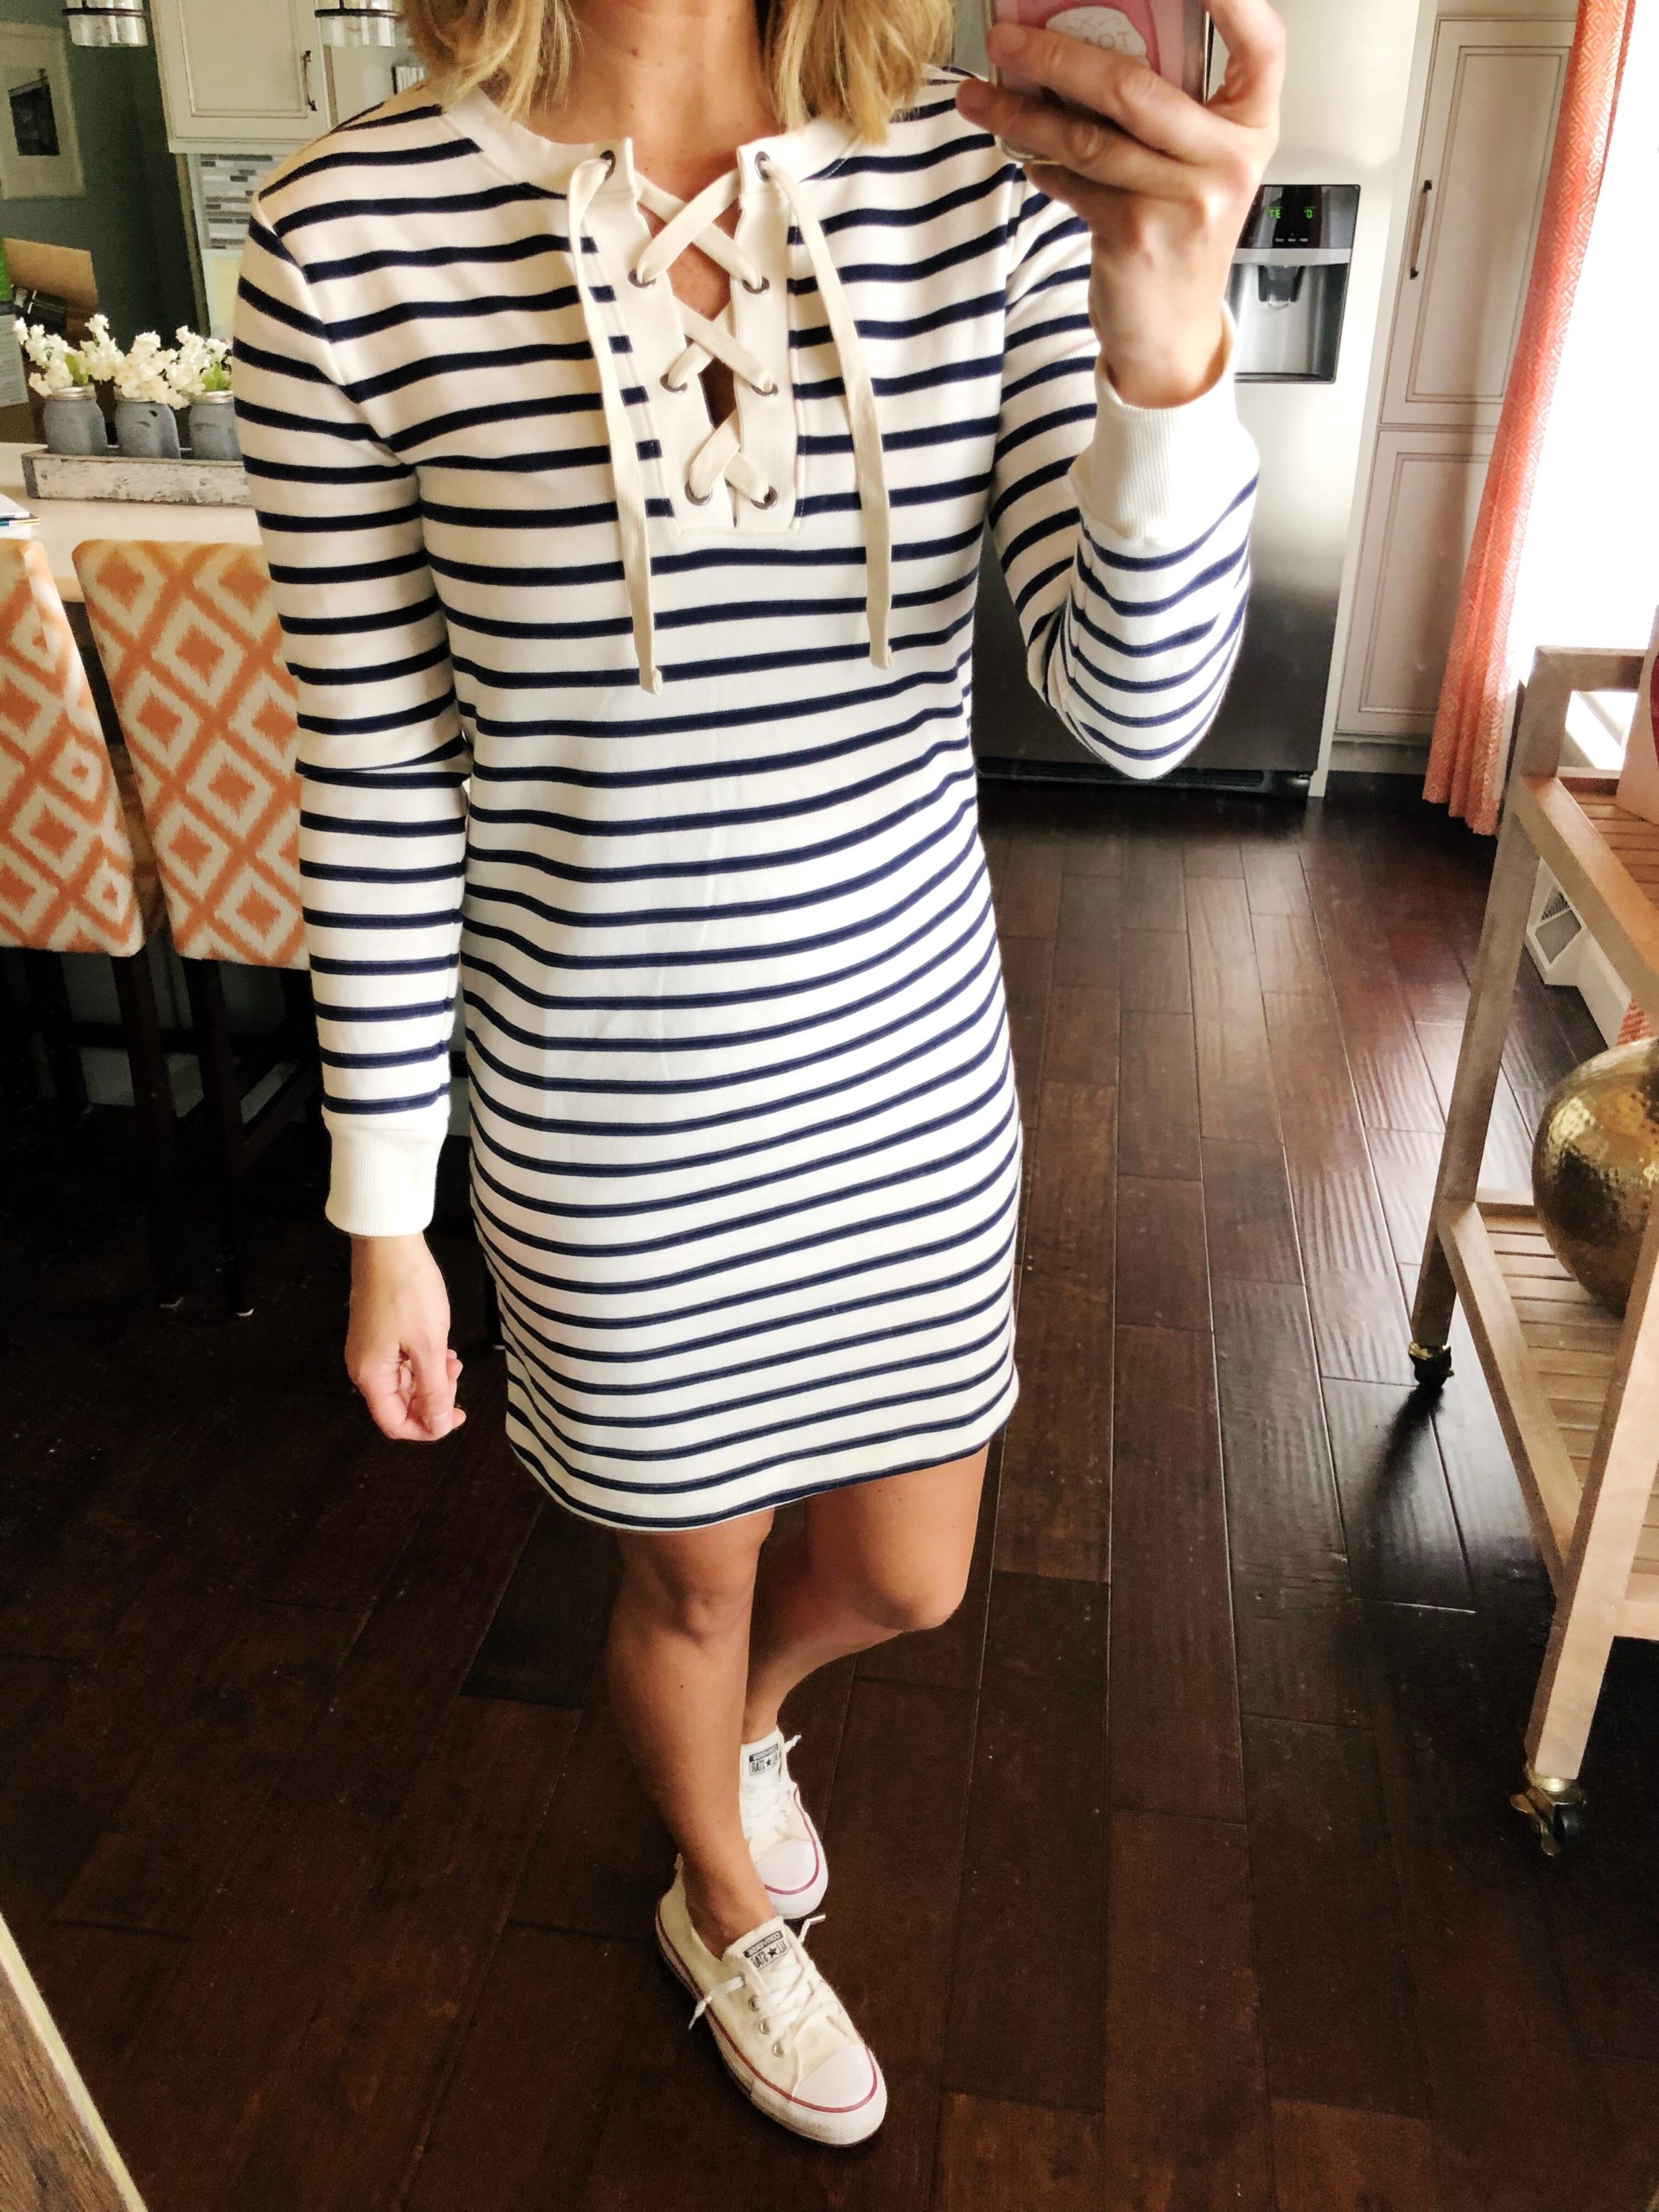 Casual Spring Dress + Converse Sneakers // Spring Fashion